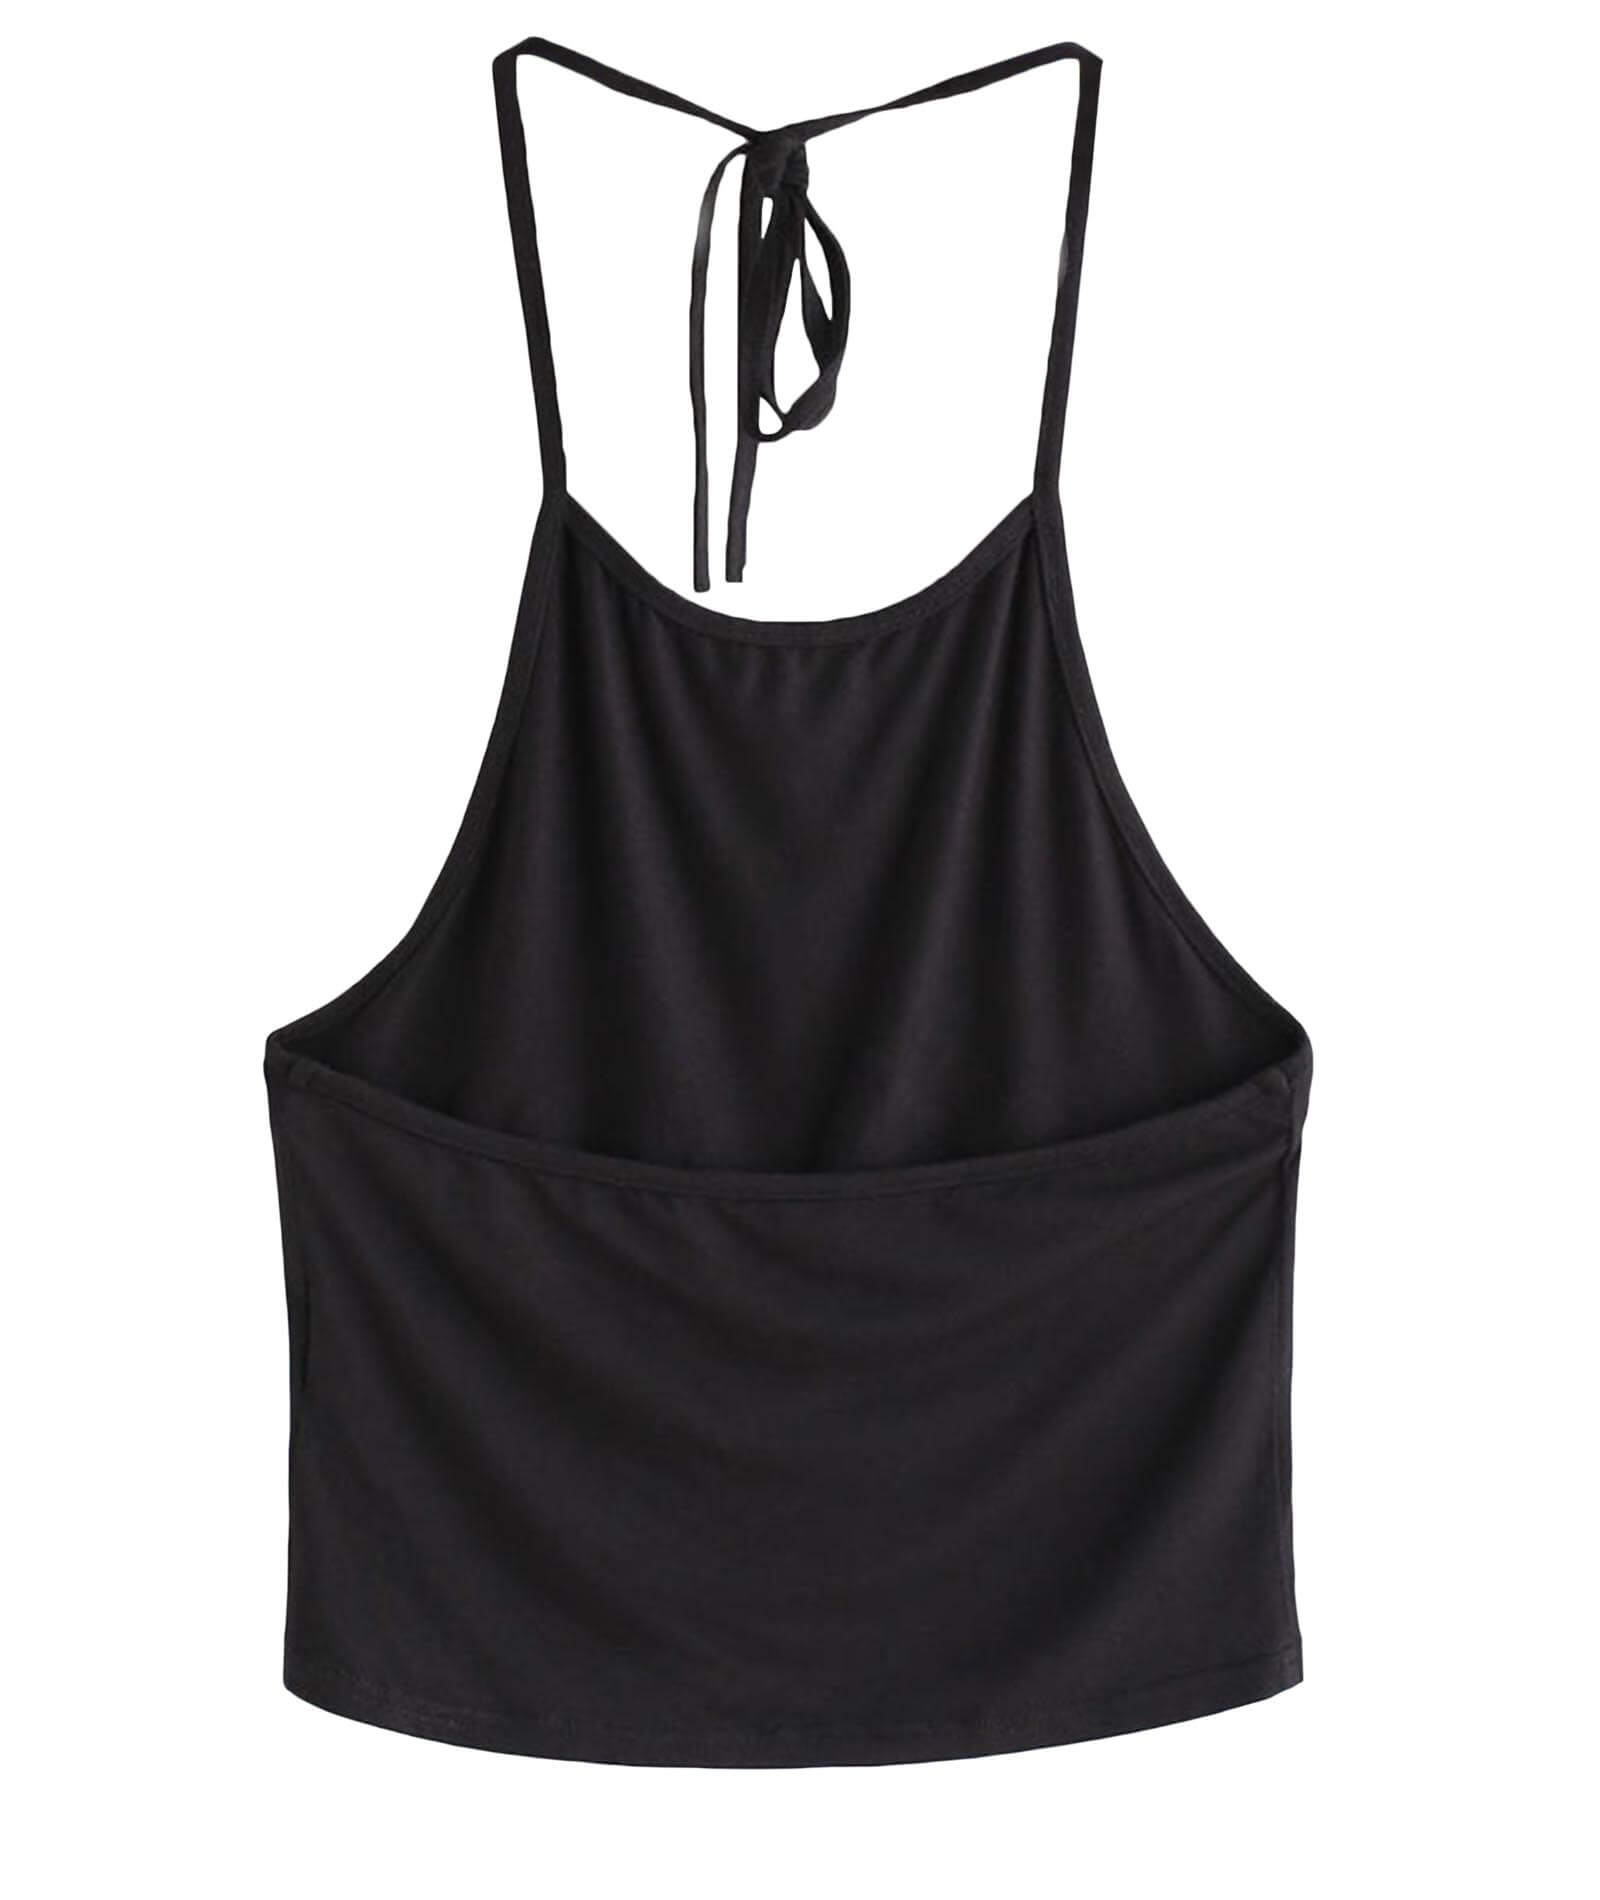  Women's Tie Halter Tops Casual Camisole Sleeveless Backless Vest Cami Tank Top